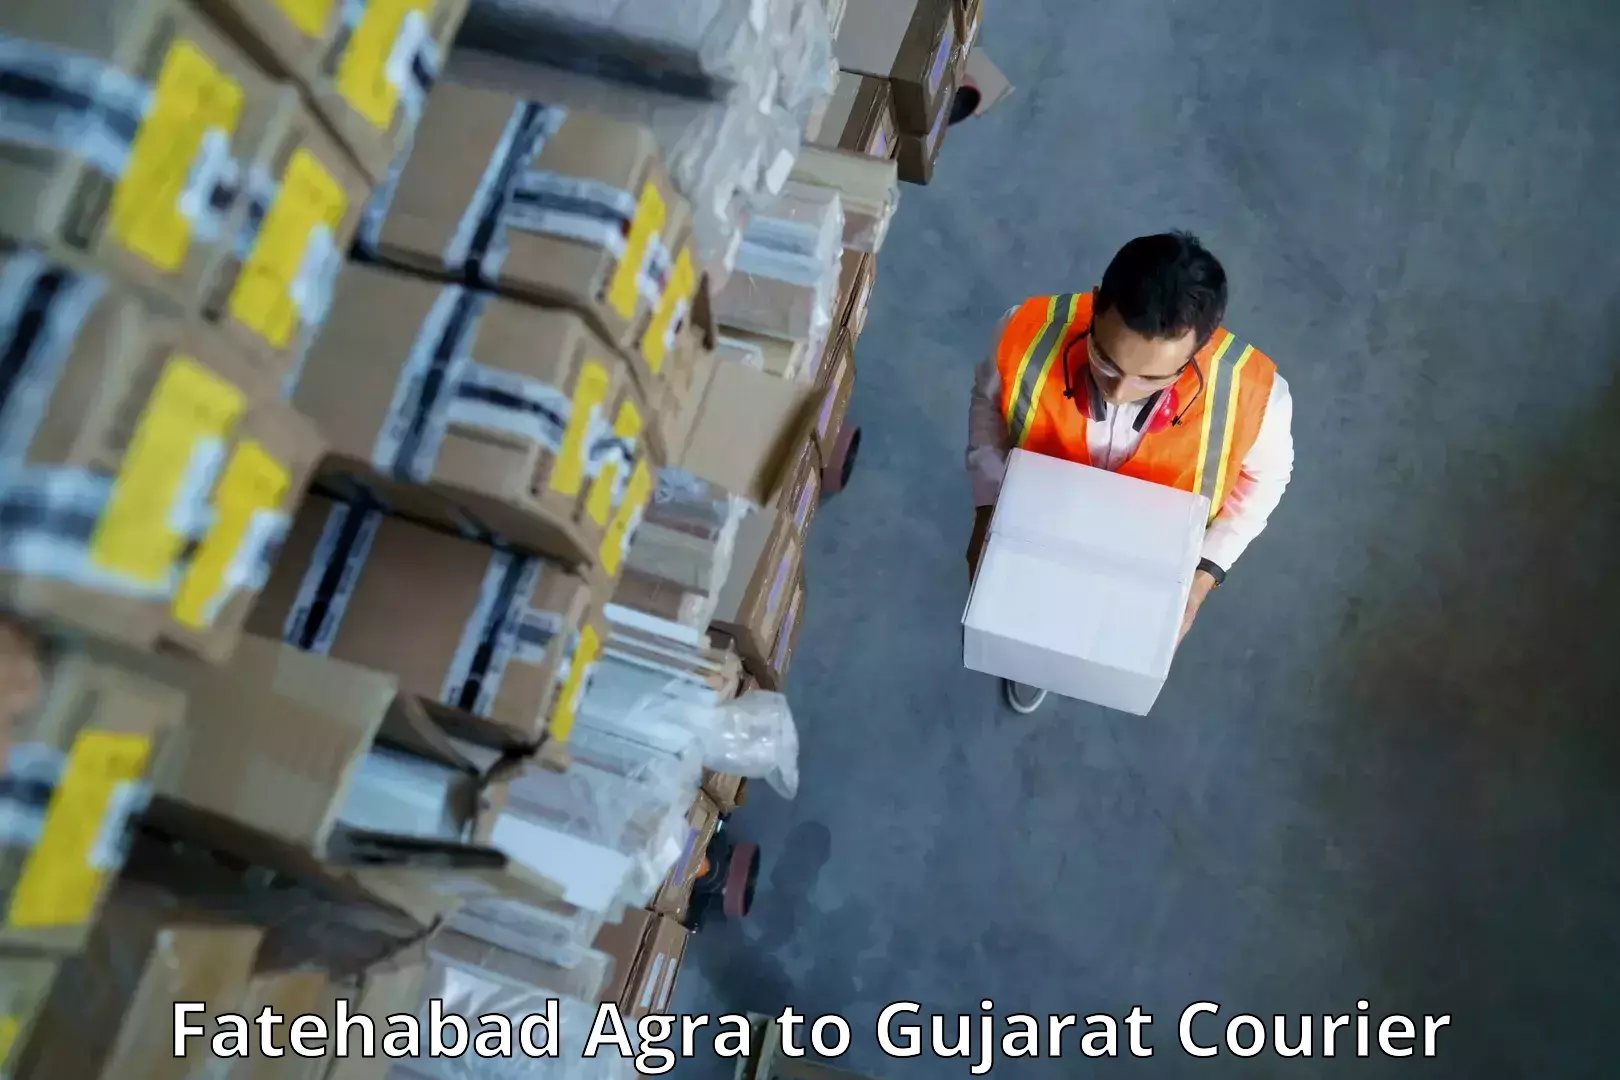 Courier tracking online Fatehabad Agra to Upleta